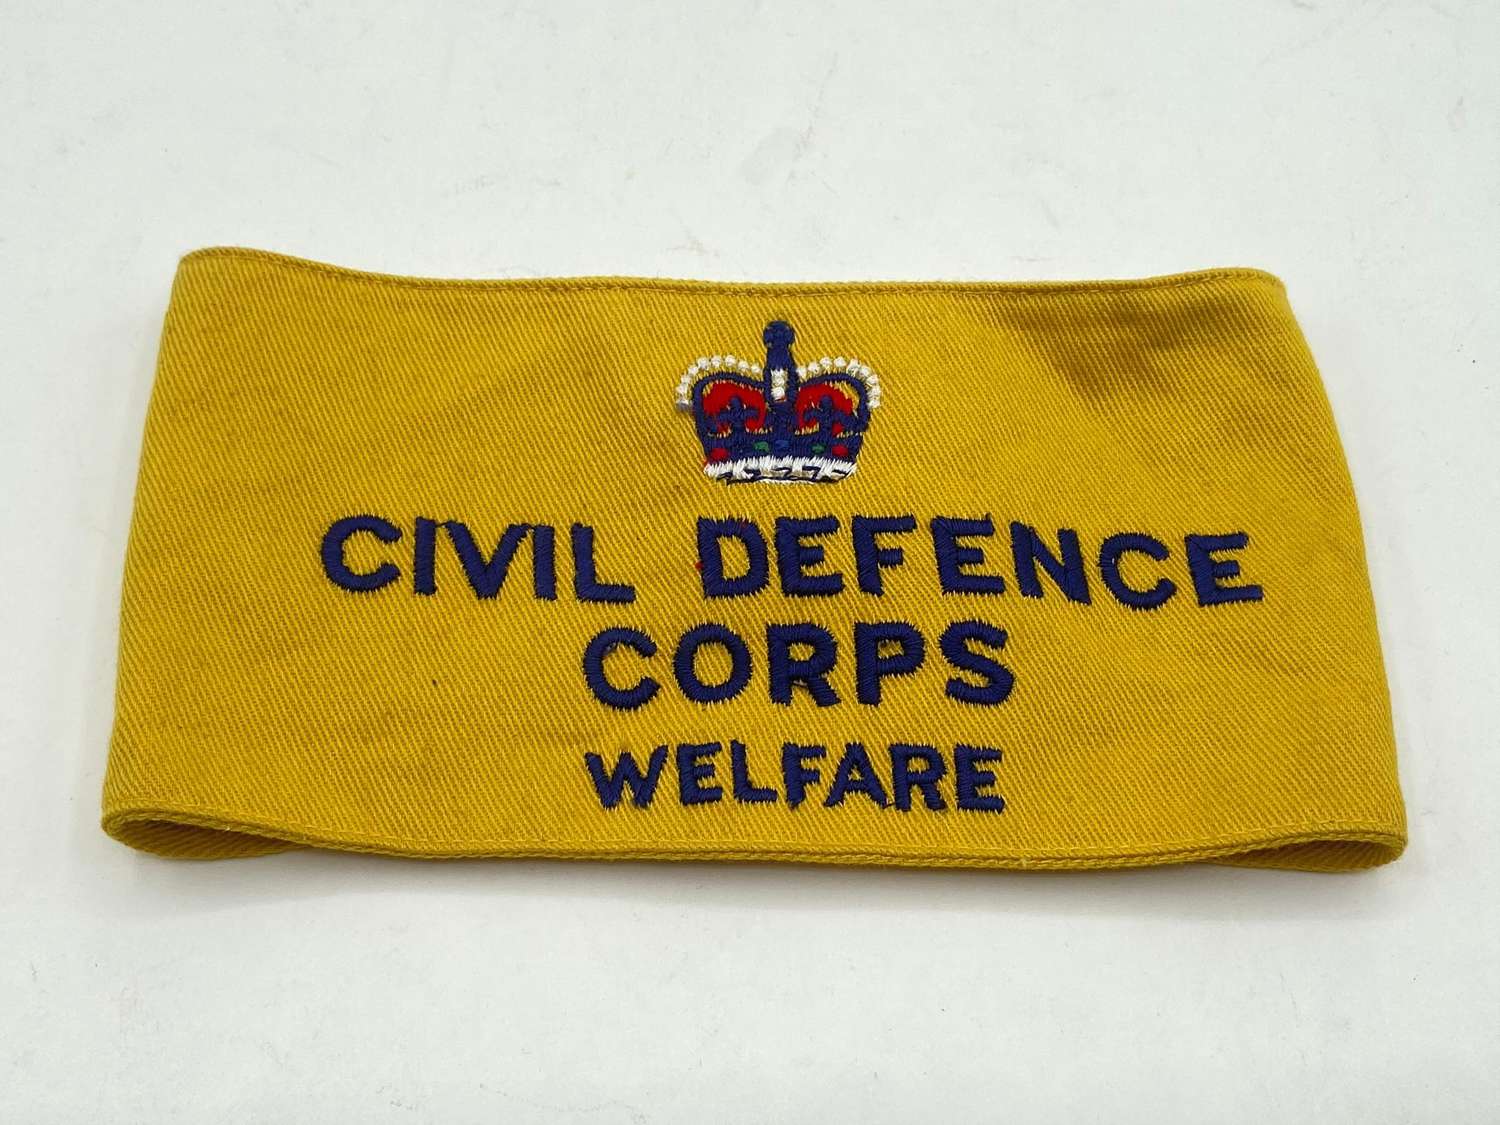 Post WW2 British Civil Defence Corps Welfare Armband By Lewis Falk